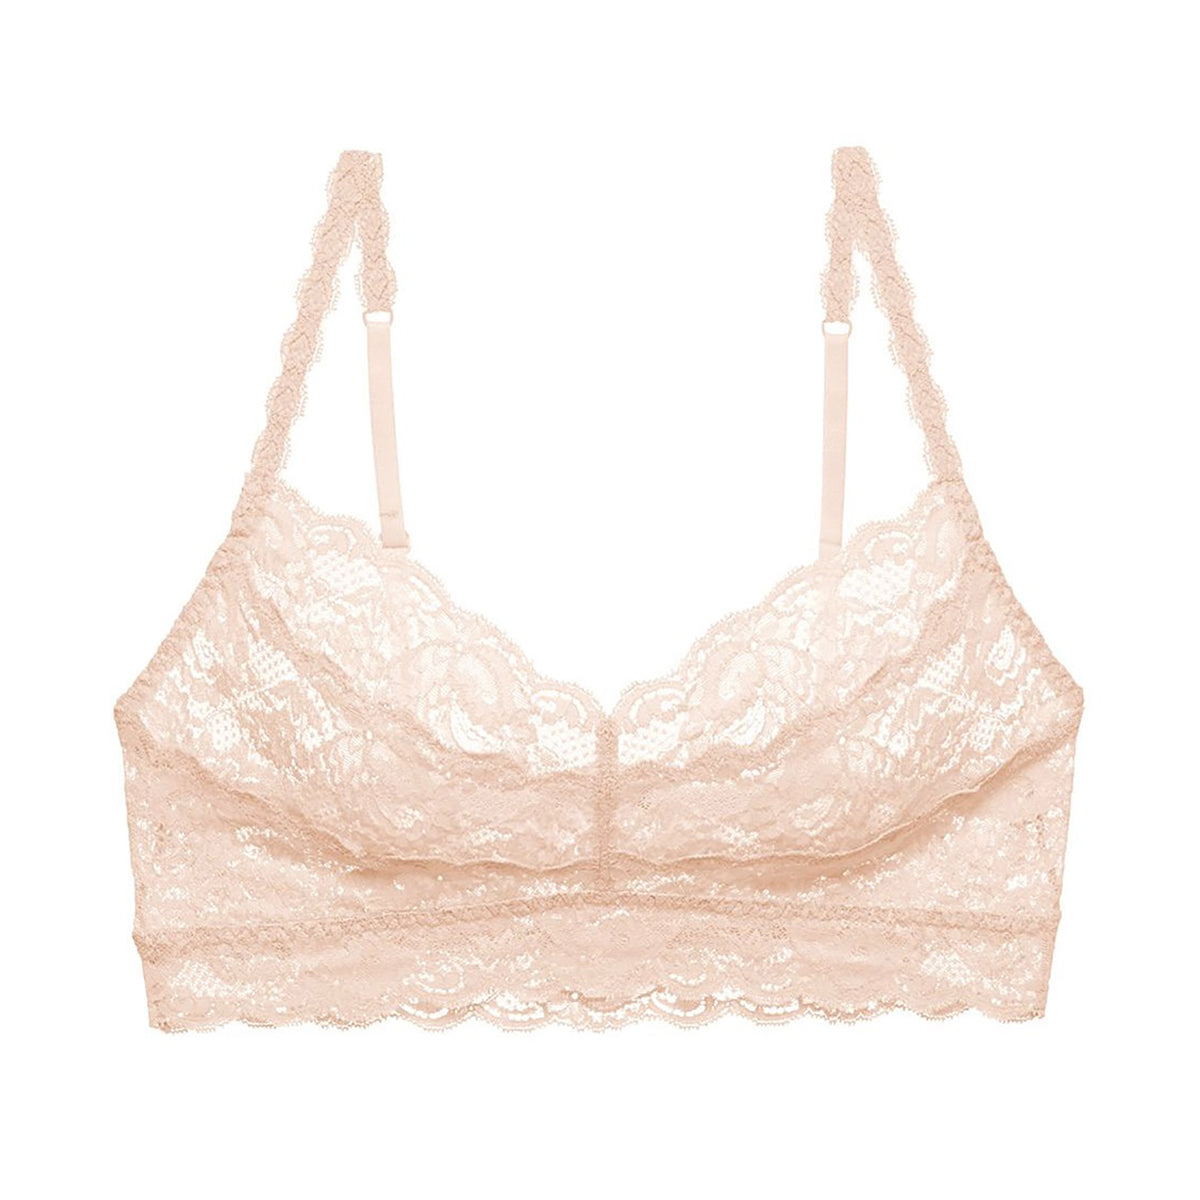 Kmart - Let's talk BRALETTE*S*. 'Cause you can never